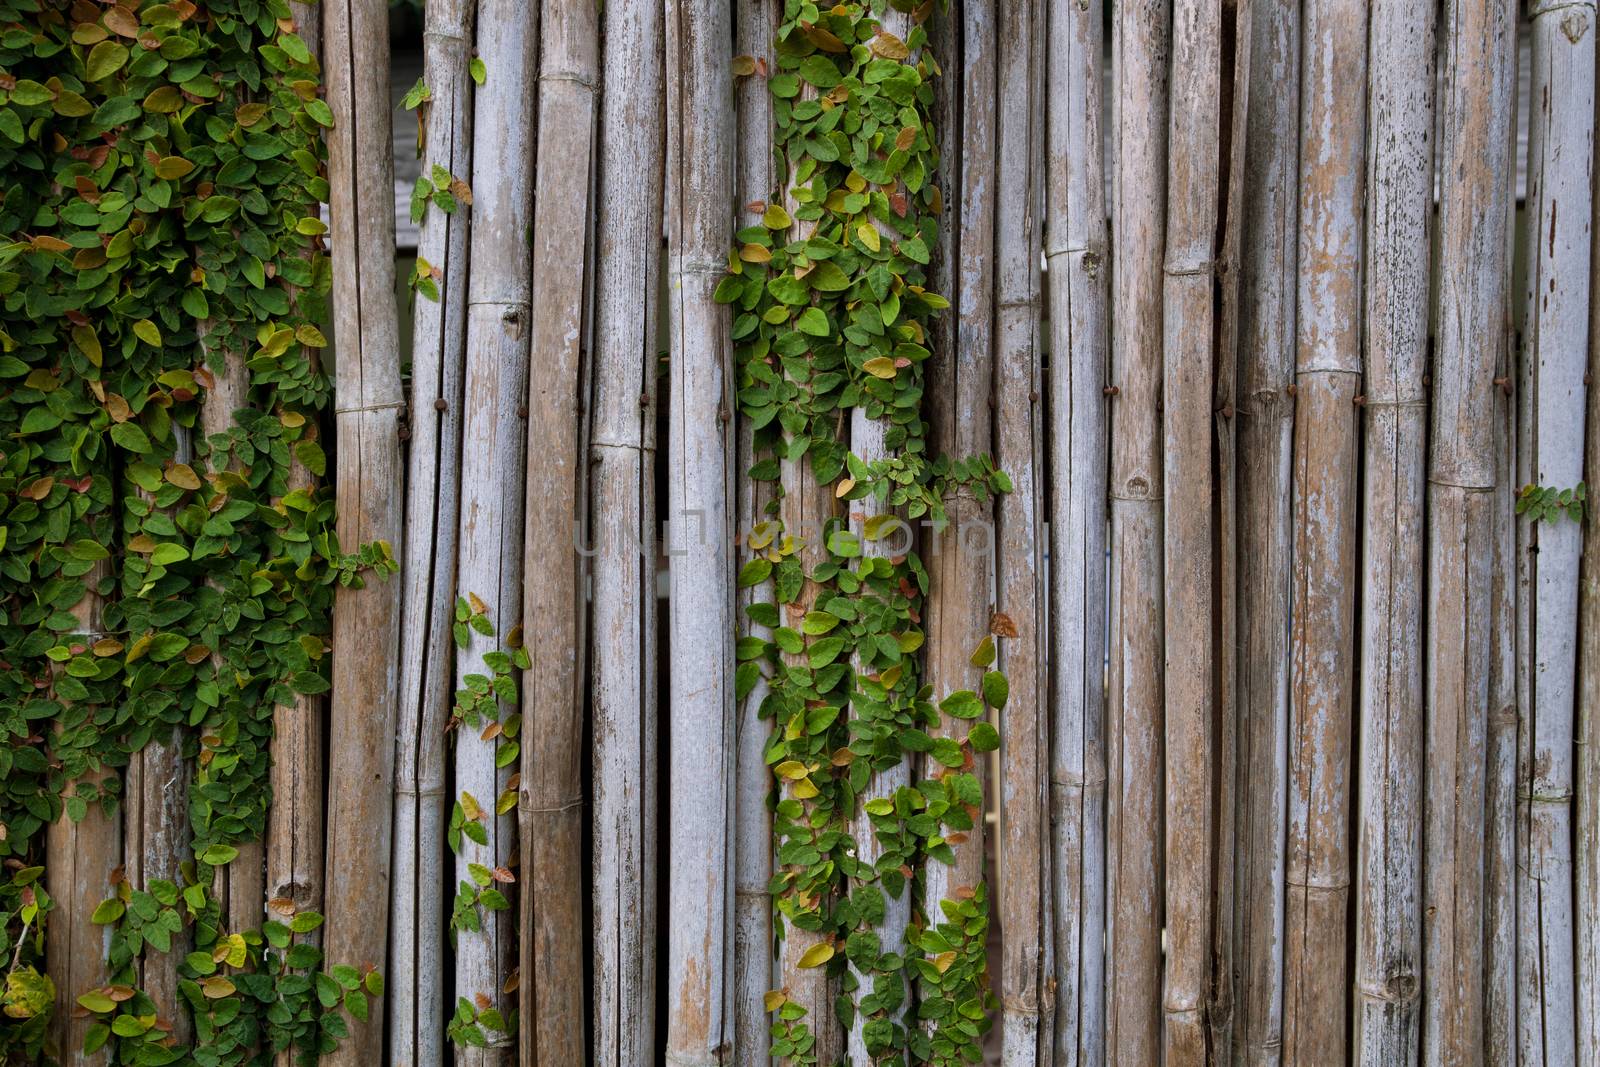 bamboo fence or wall texture background for interior or exterior design. by asiandelight